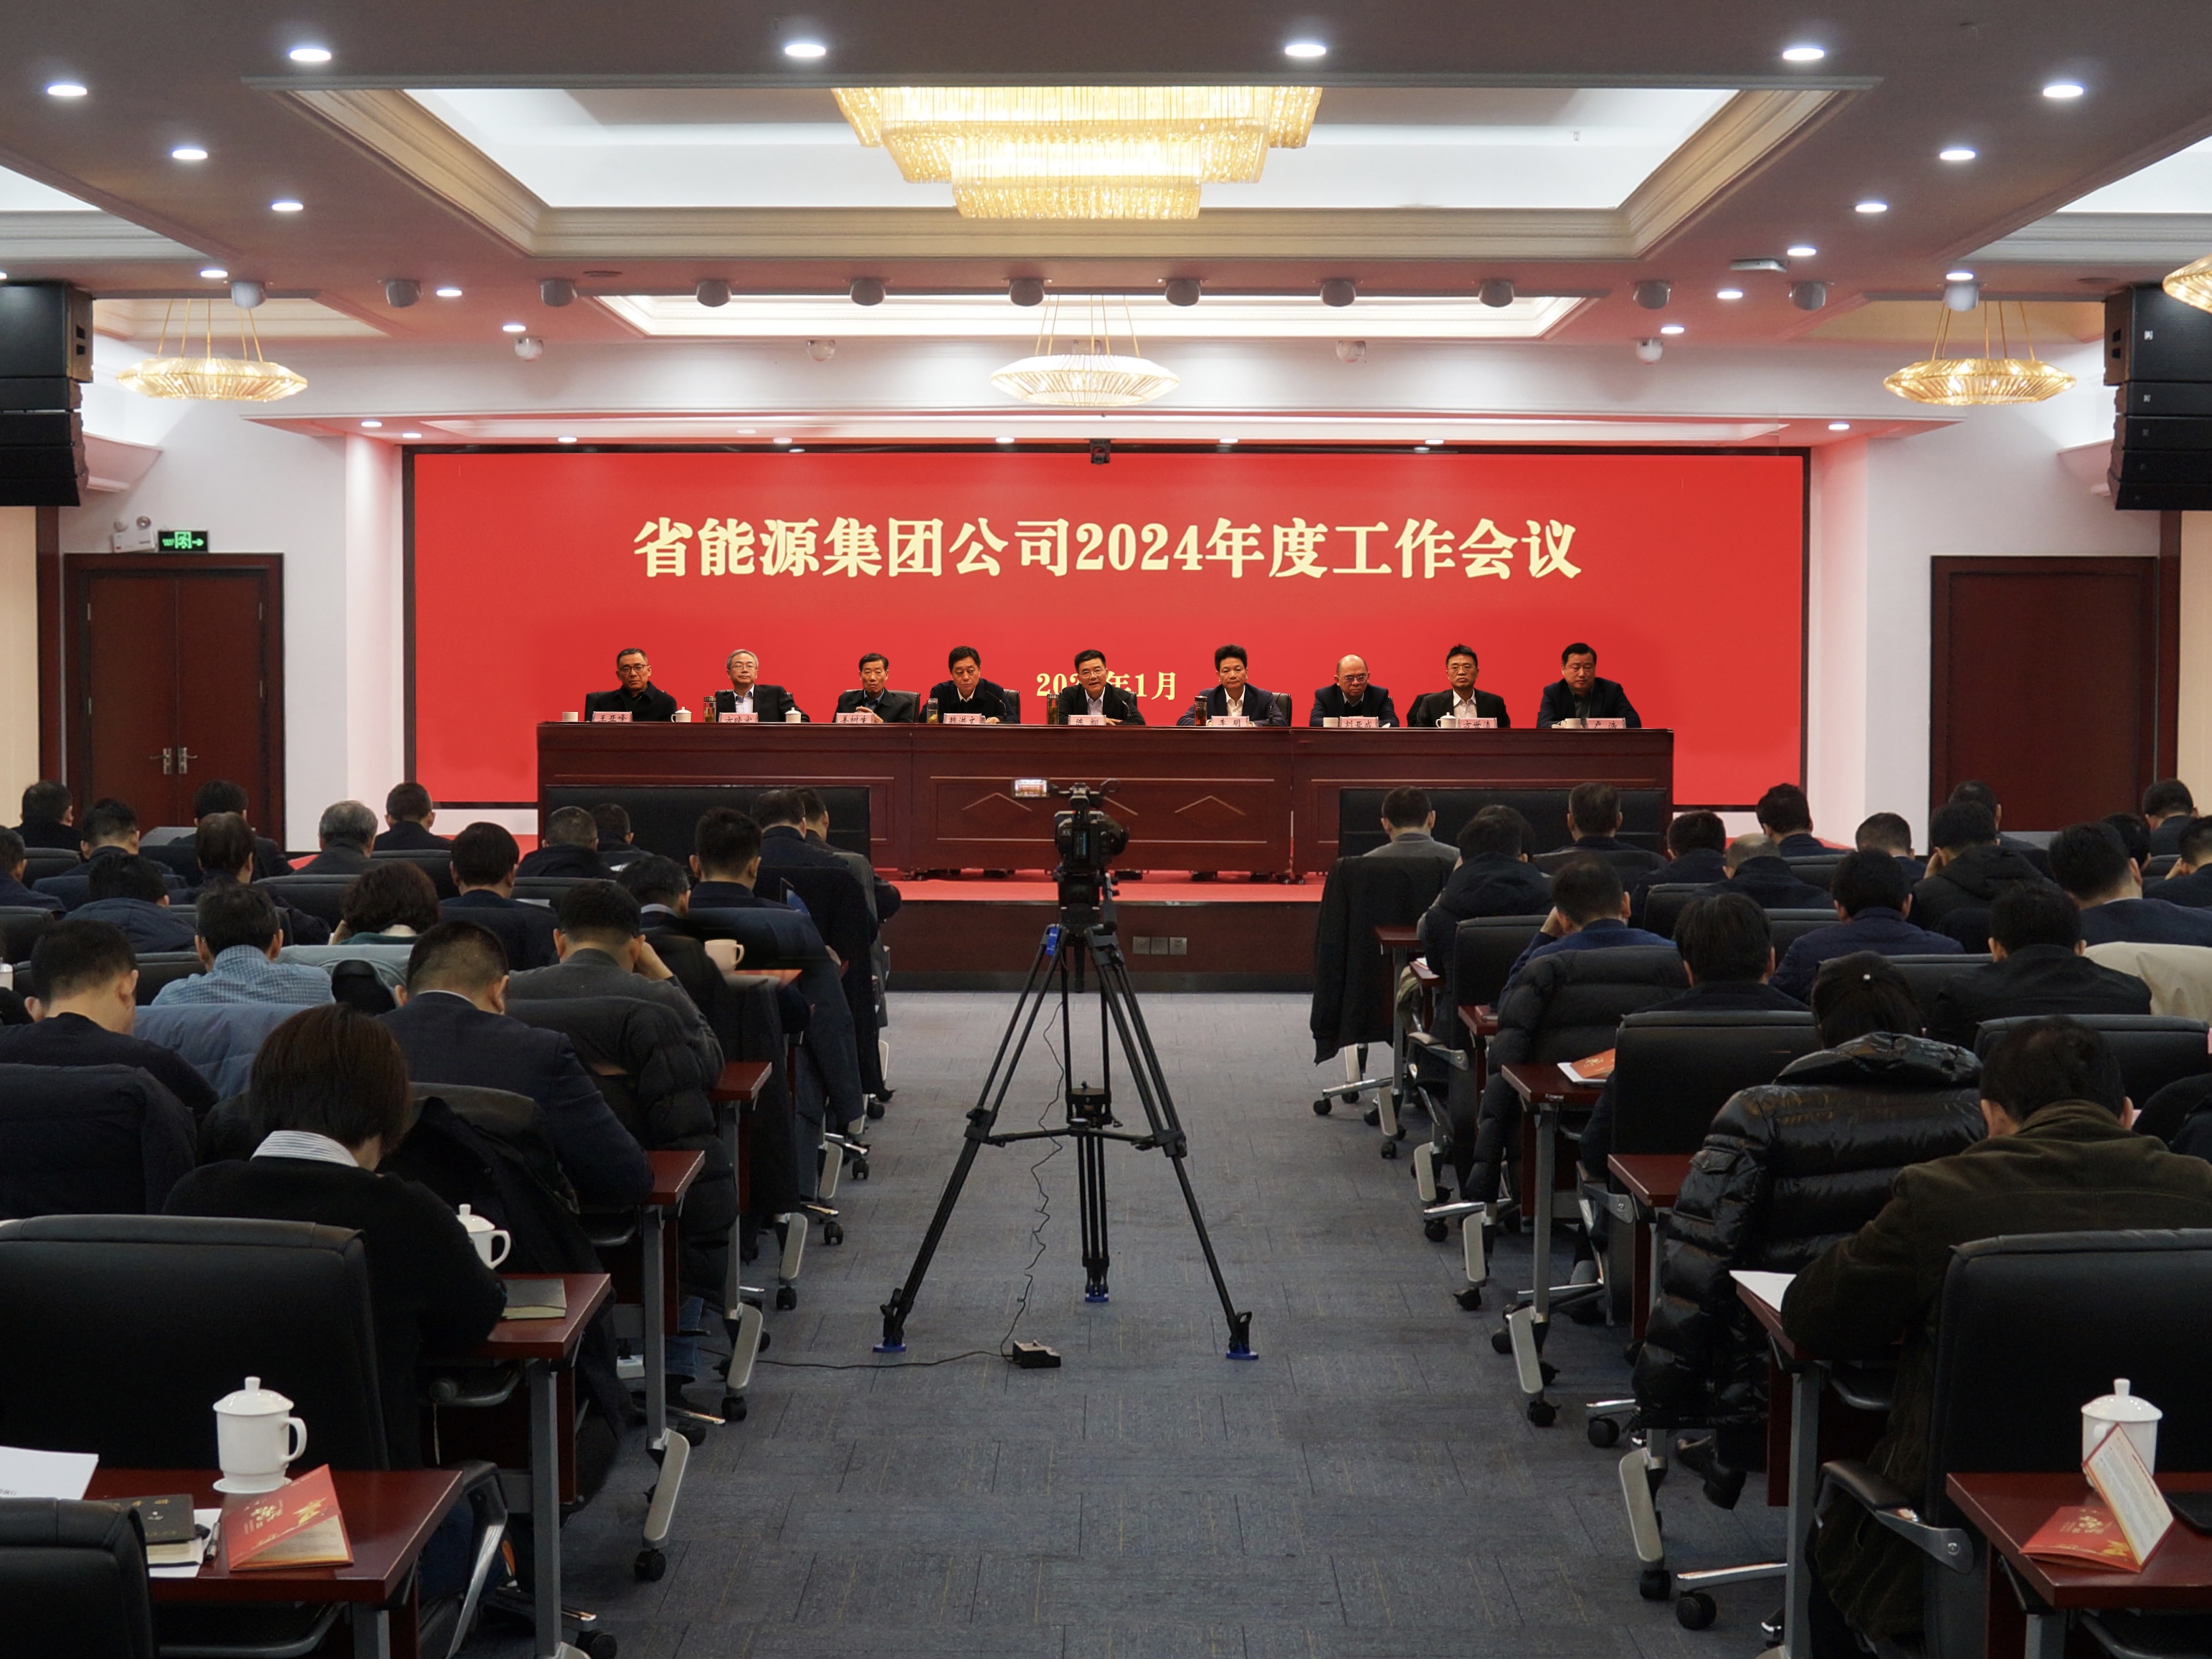 The Group Company held the 2024 Working Conference